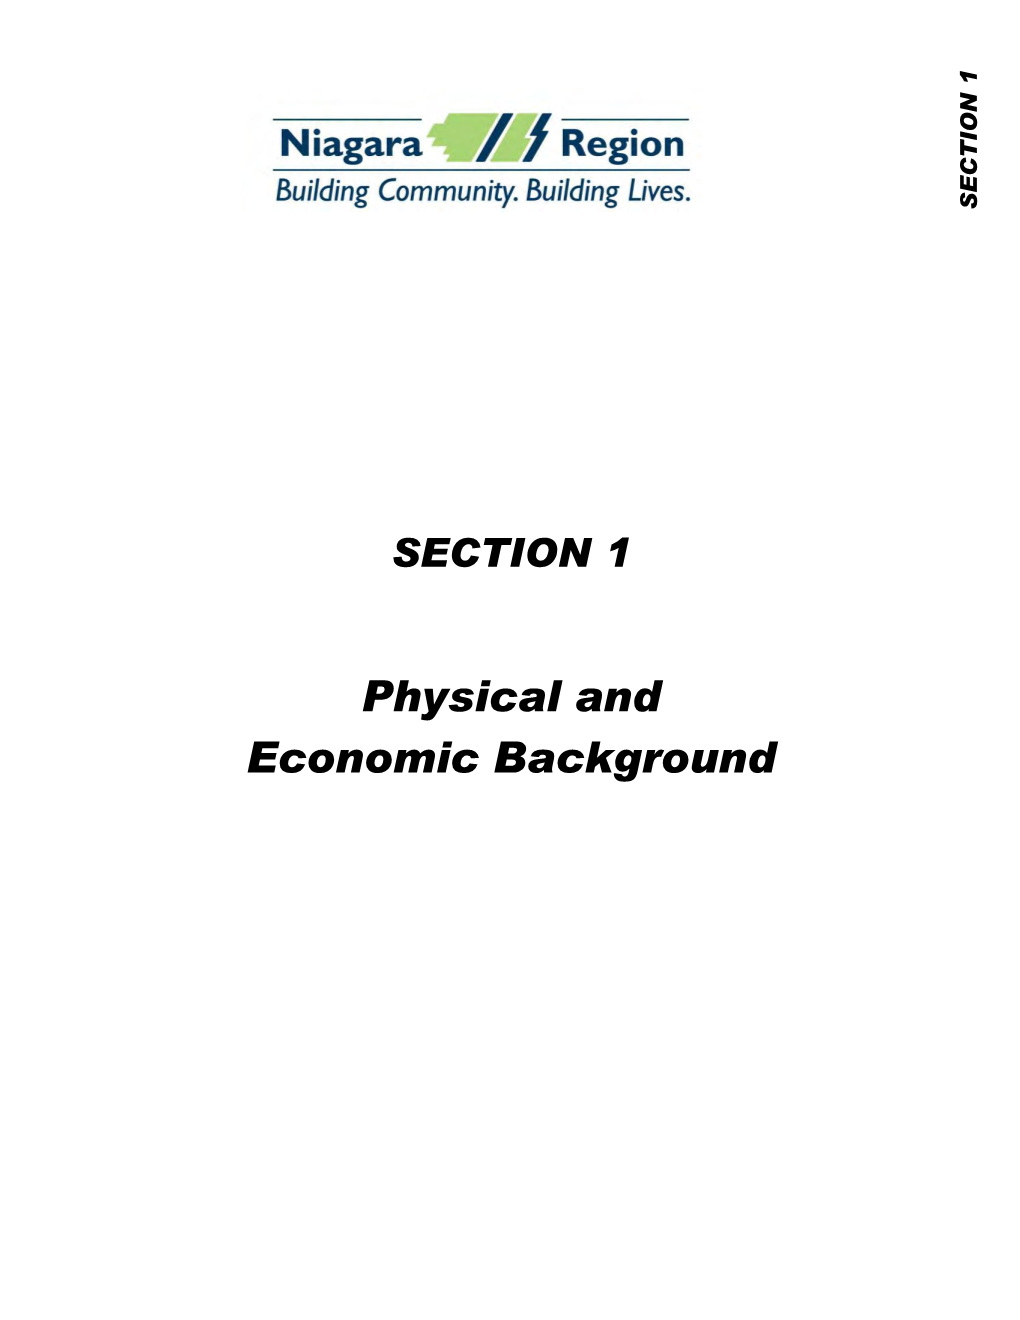 Physical and Economic Background (Section 1)